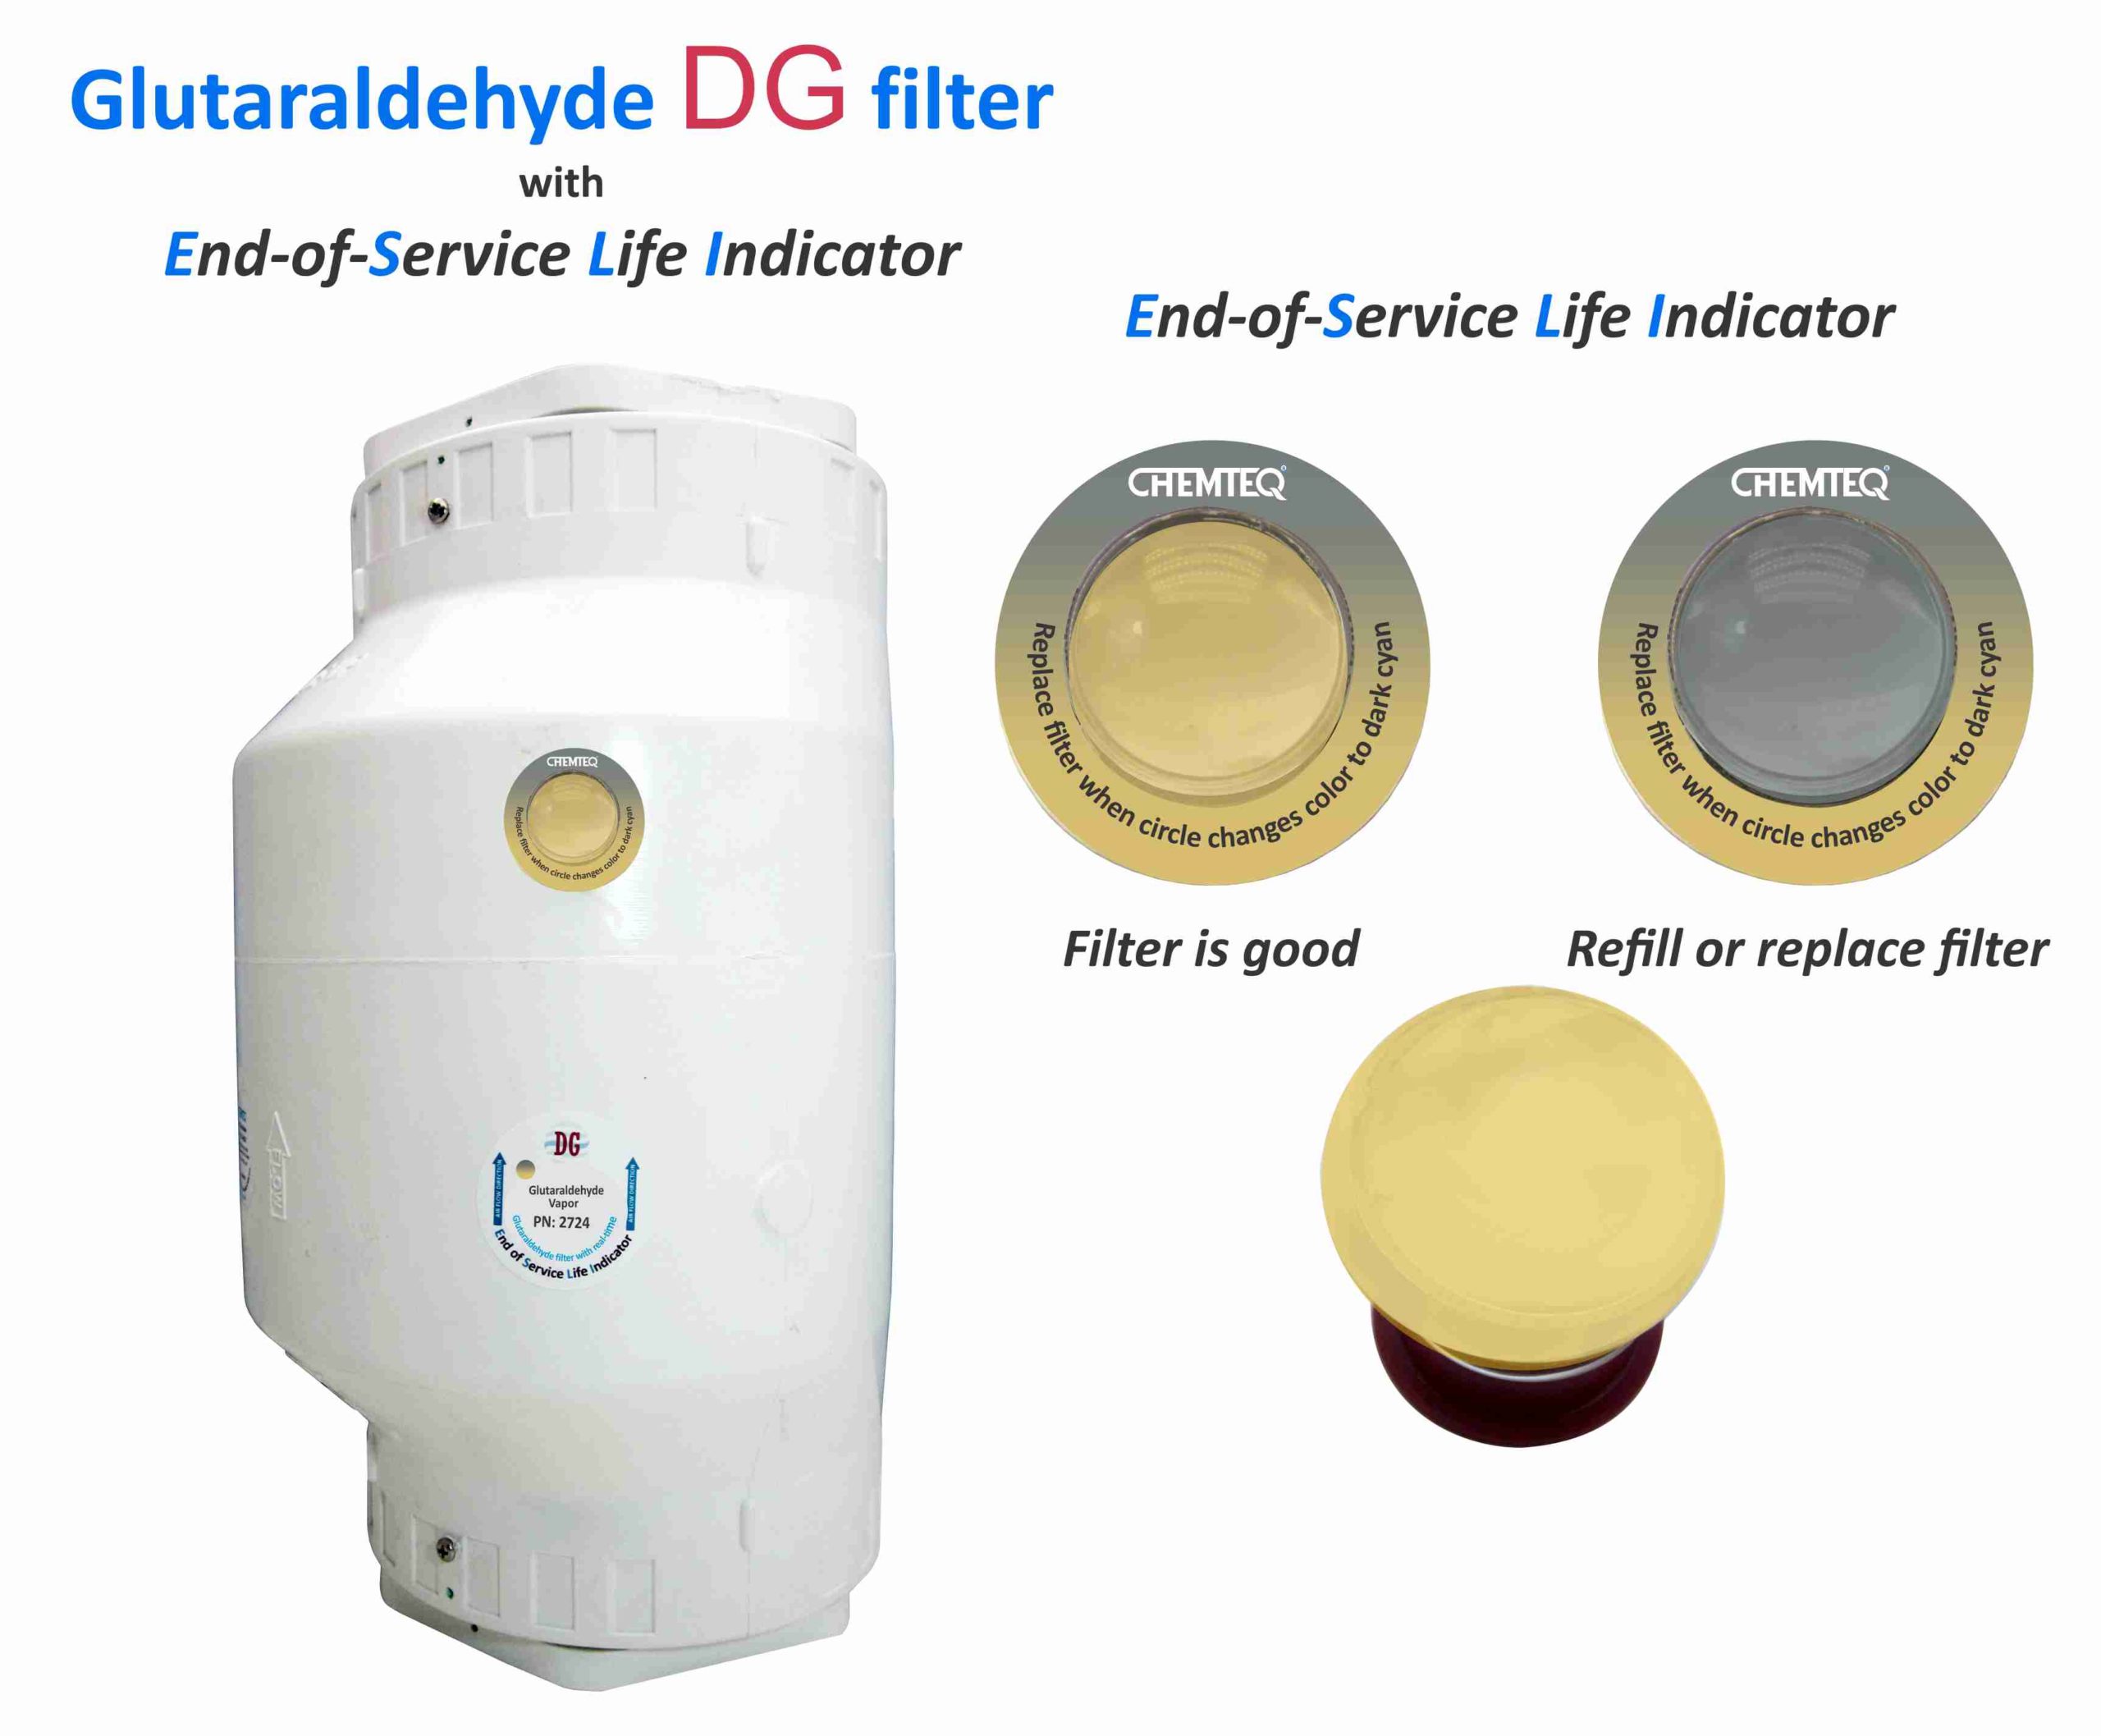 Glutaraldehyde DG FILTER-ESLI 2724. Glutaraldehyde filter with end-of-service life indicator suitable for chemical processes and reactor vents.